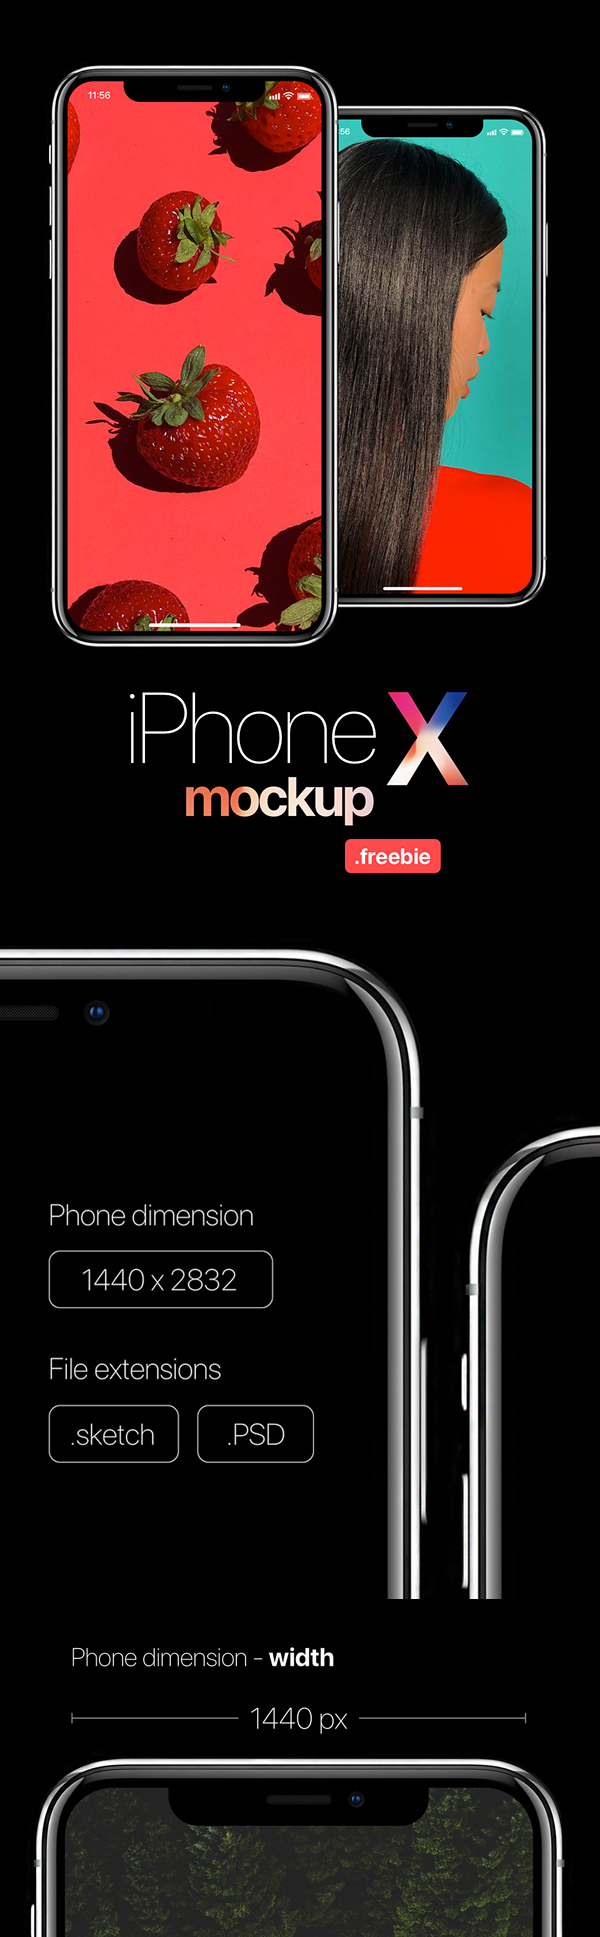 Free Download iPhone X PSD Mockups and Sketch - 5